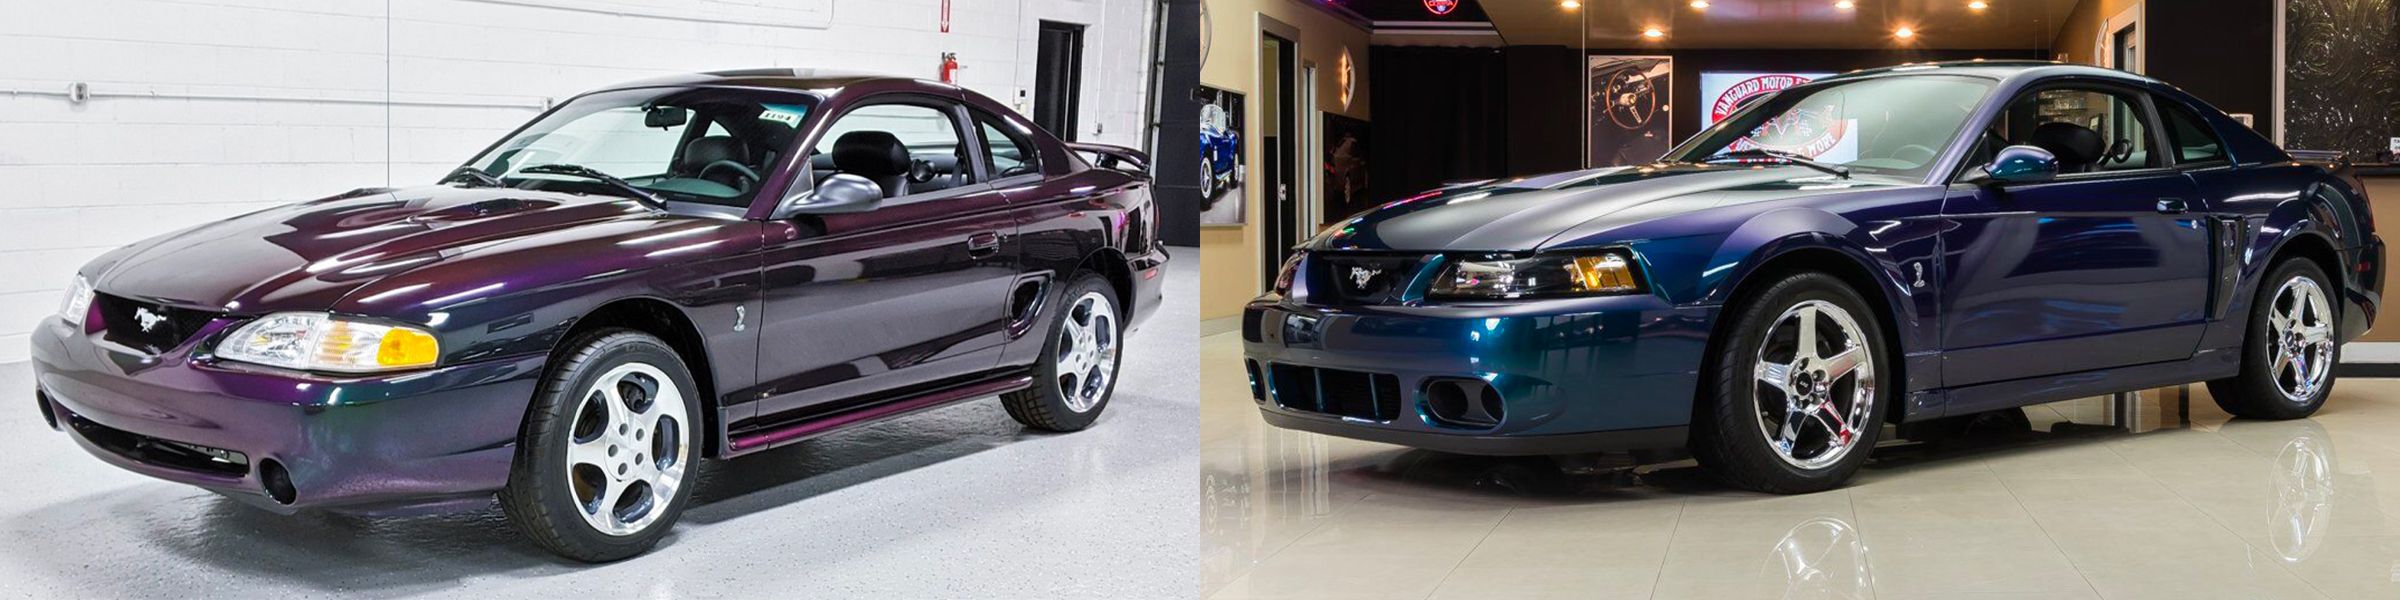 Best SN95 & New Edge Mustang Colors | 1994-04 - Best SN95 & New Edge Mustang Colors | 1994-04